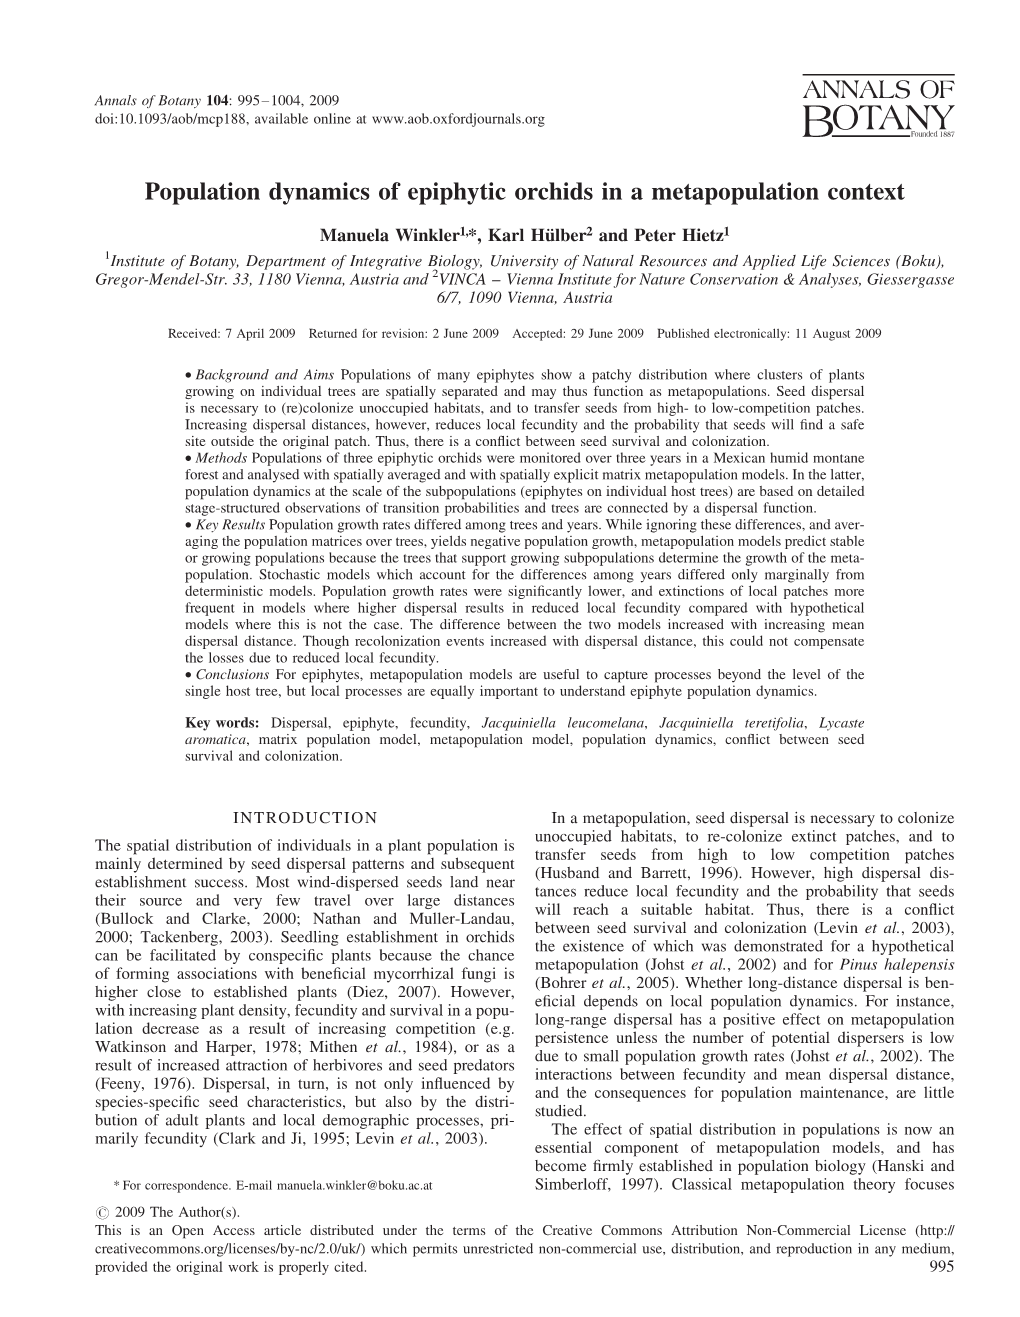 Population Dynamics of Epiphytic Orchids in a Metapopulation Context